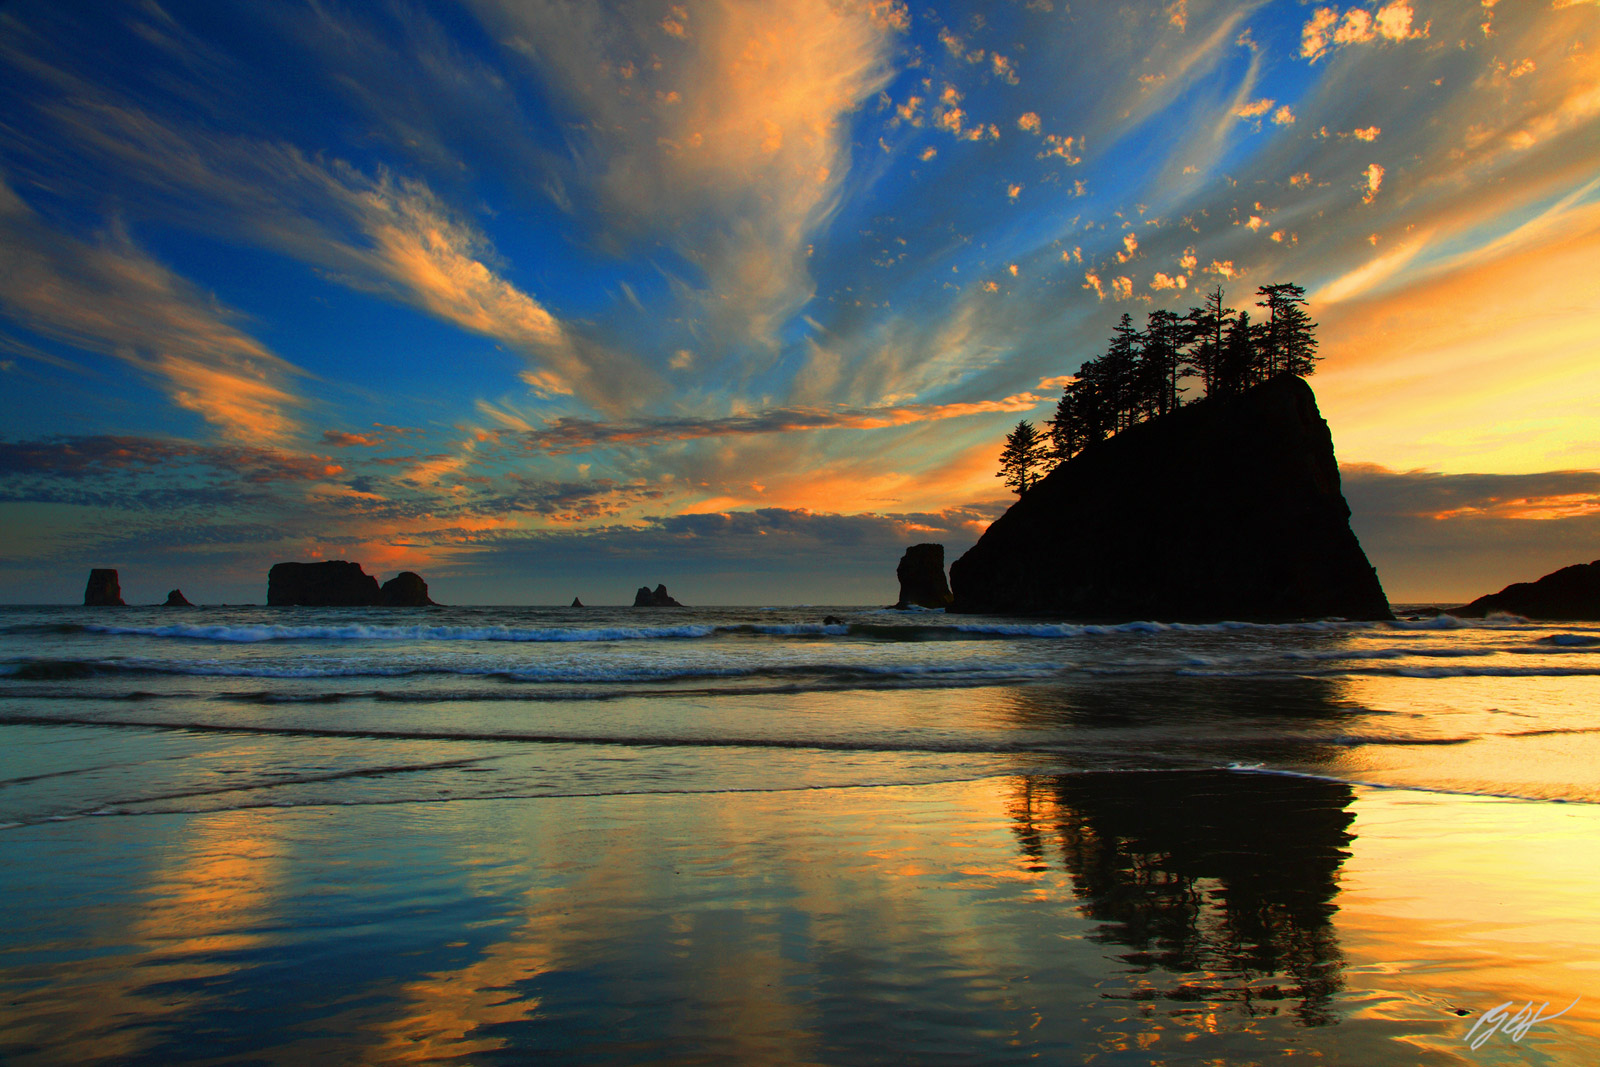 Sunset from Second Beach in Olympic National Park, Washington